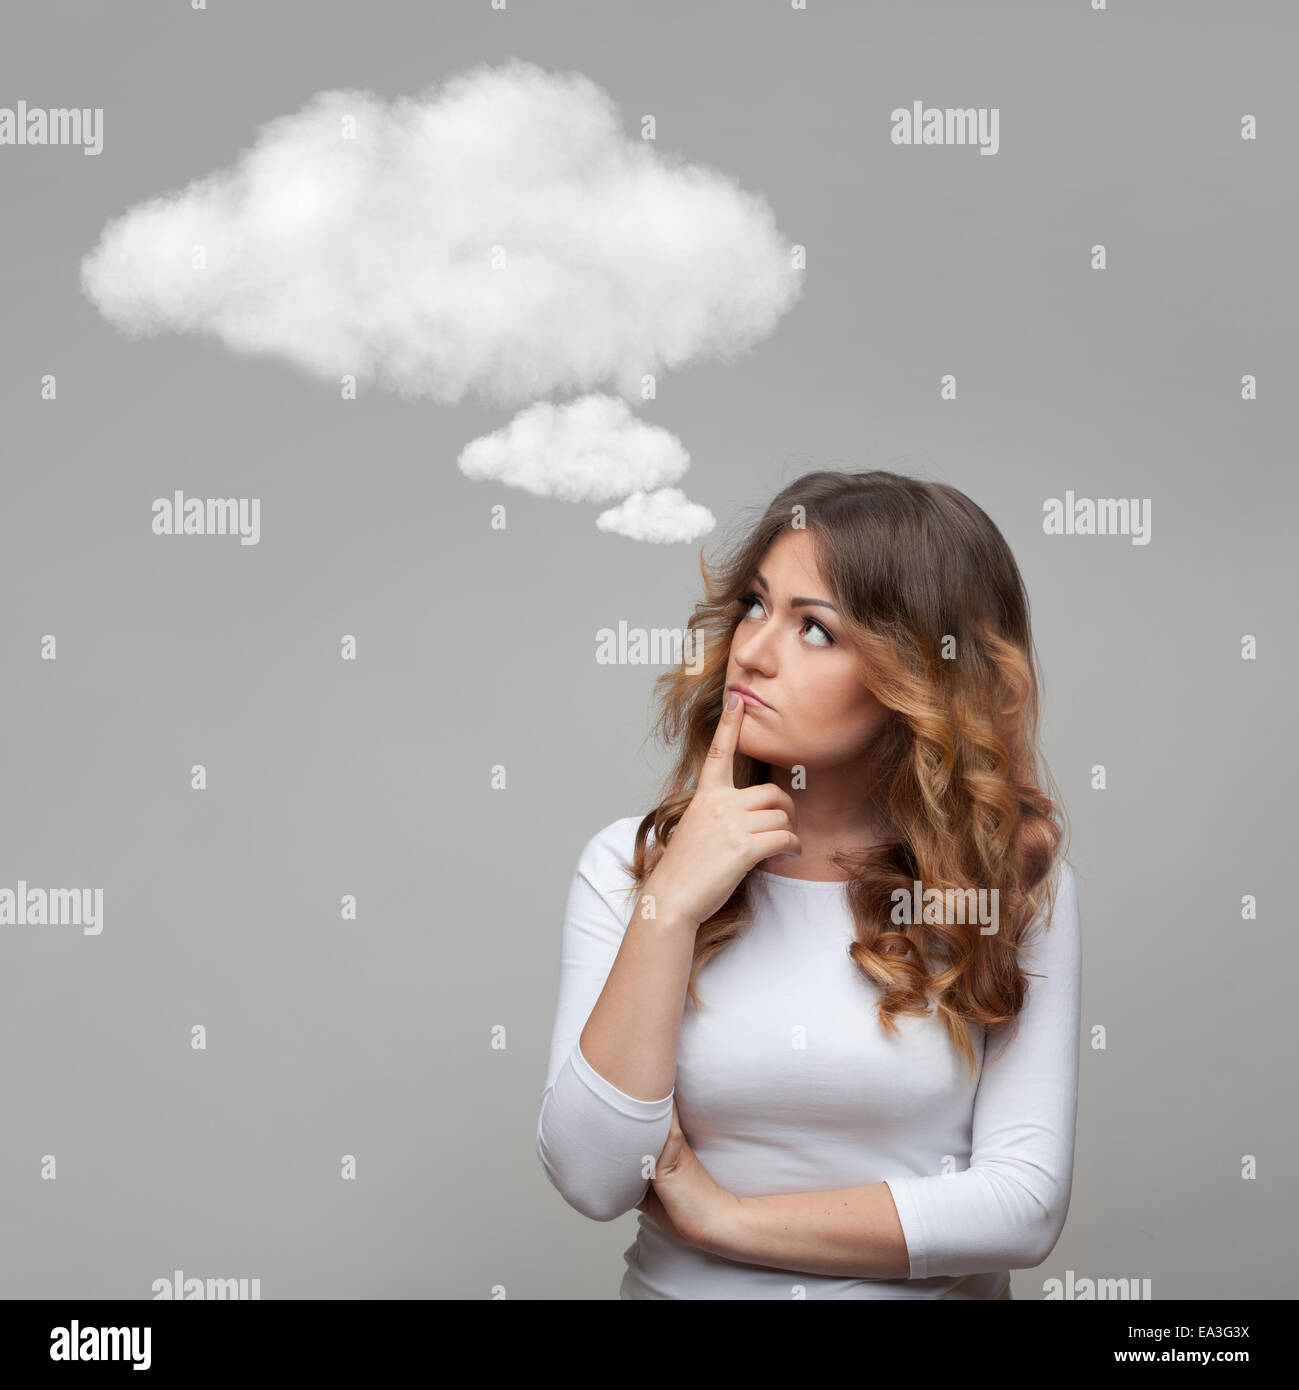 Thinking woman and empty cloud Stock Photo